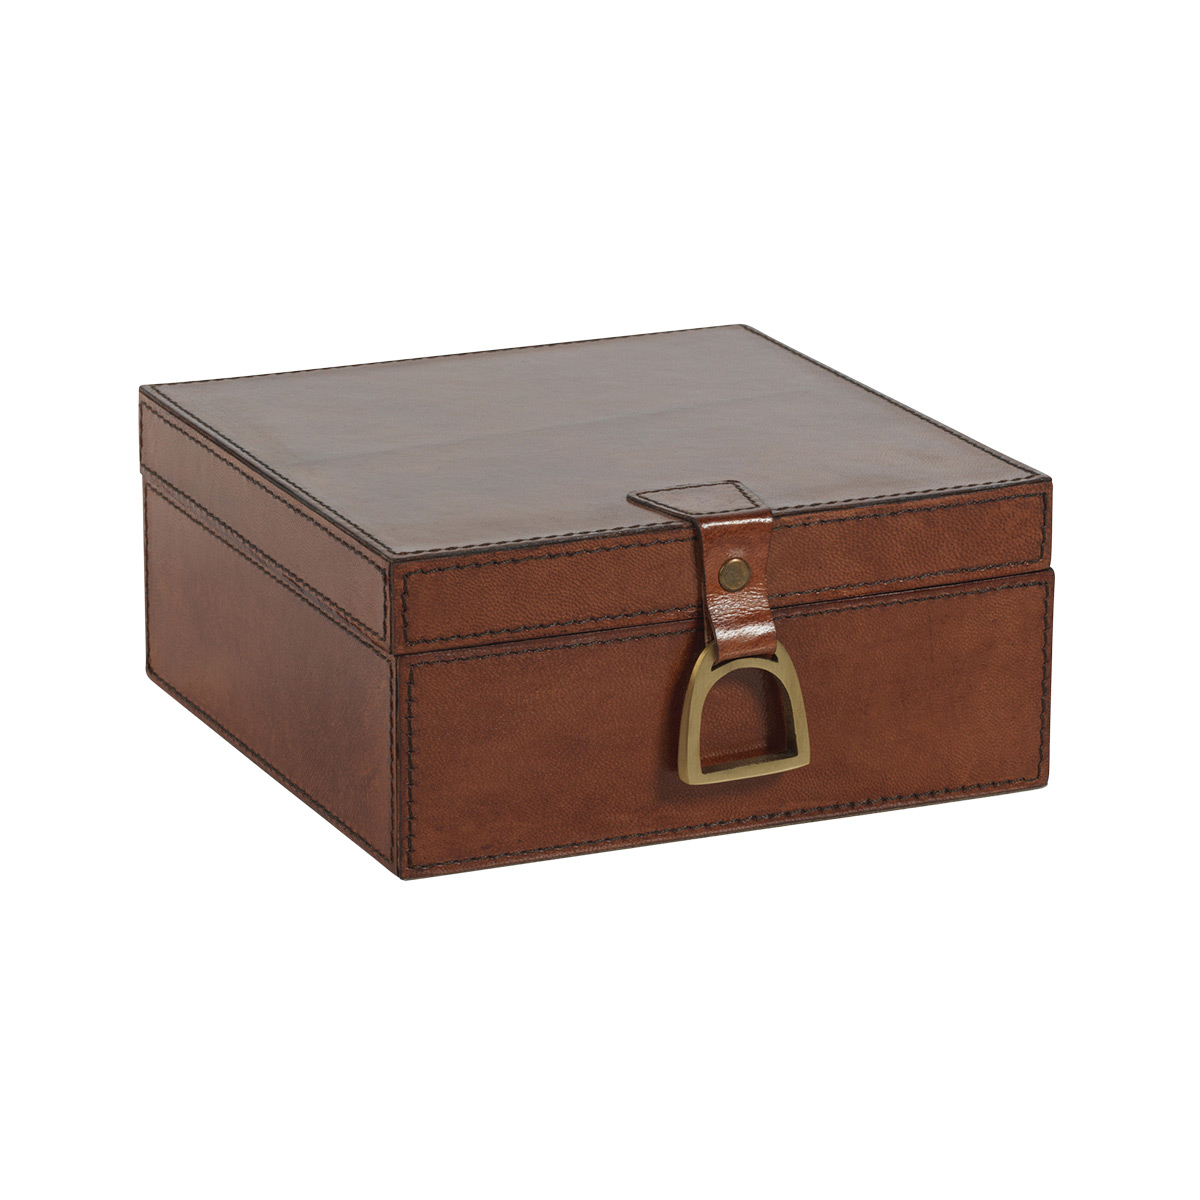 Zodax Small Hinge-Lid Leather Box Brown